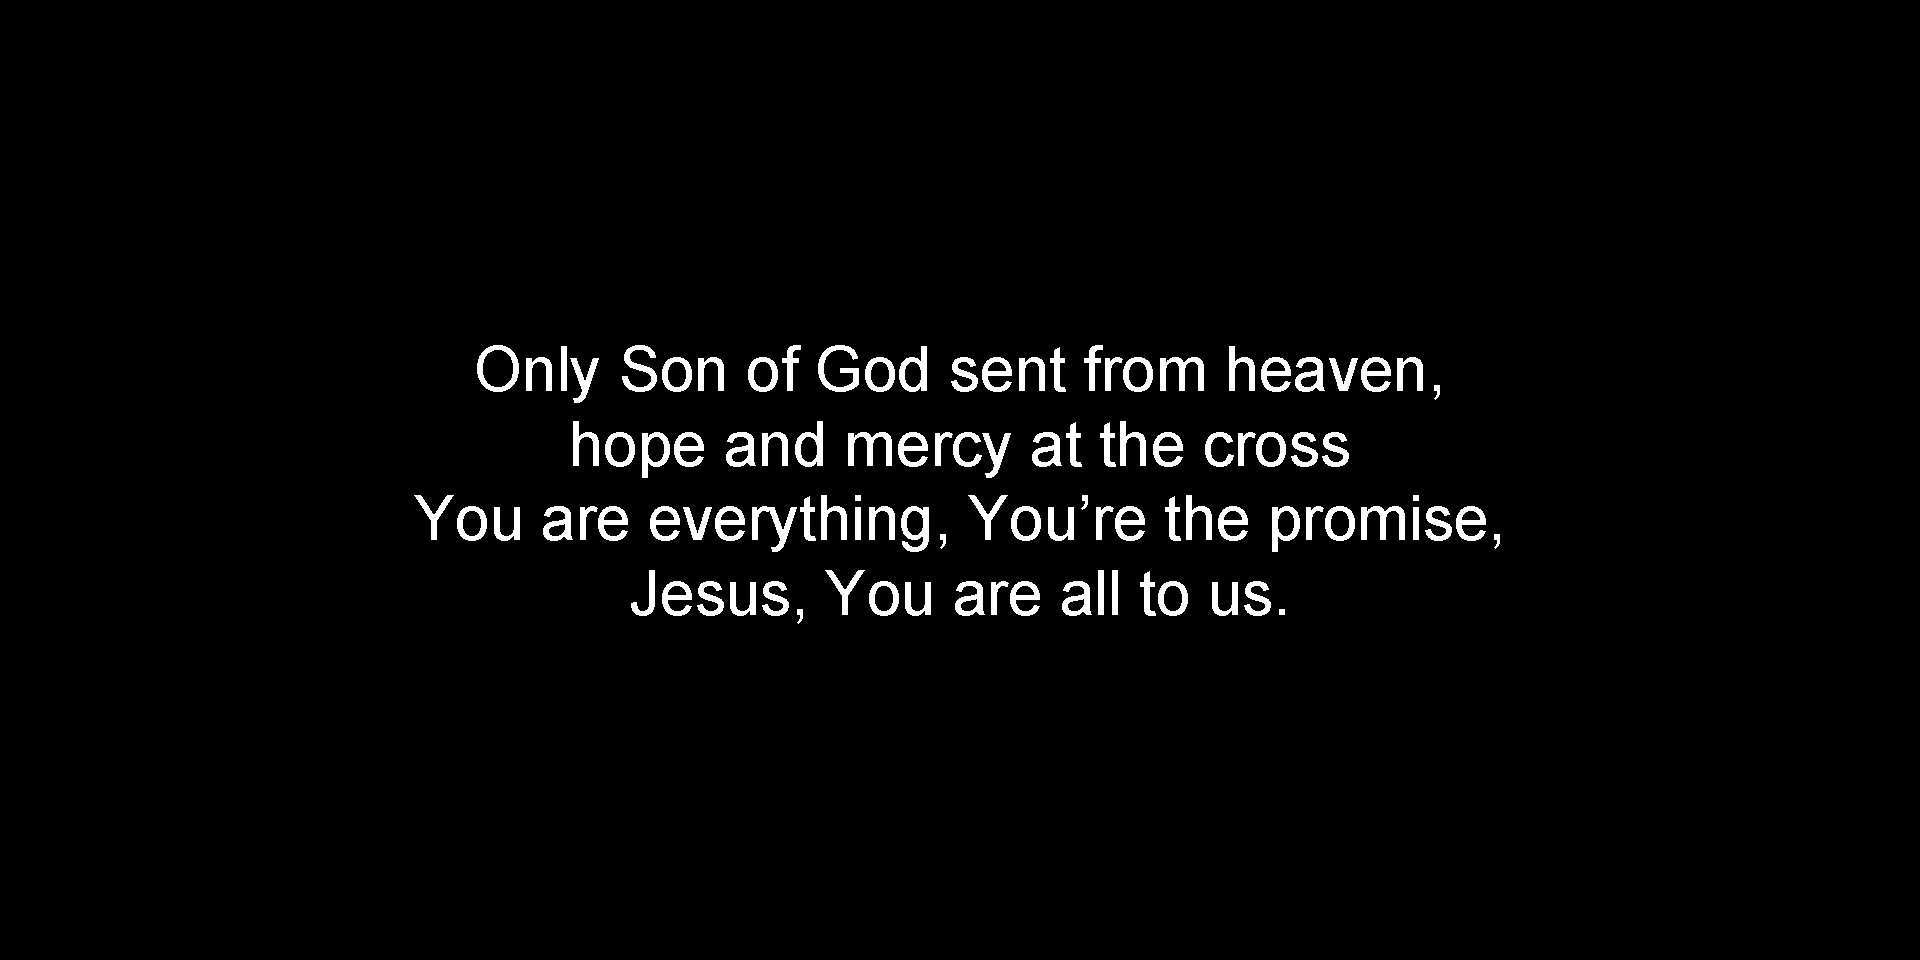 Only Son of God sent from heaven, hope and mercy at the cross You